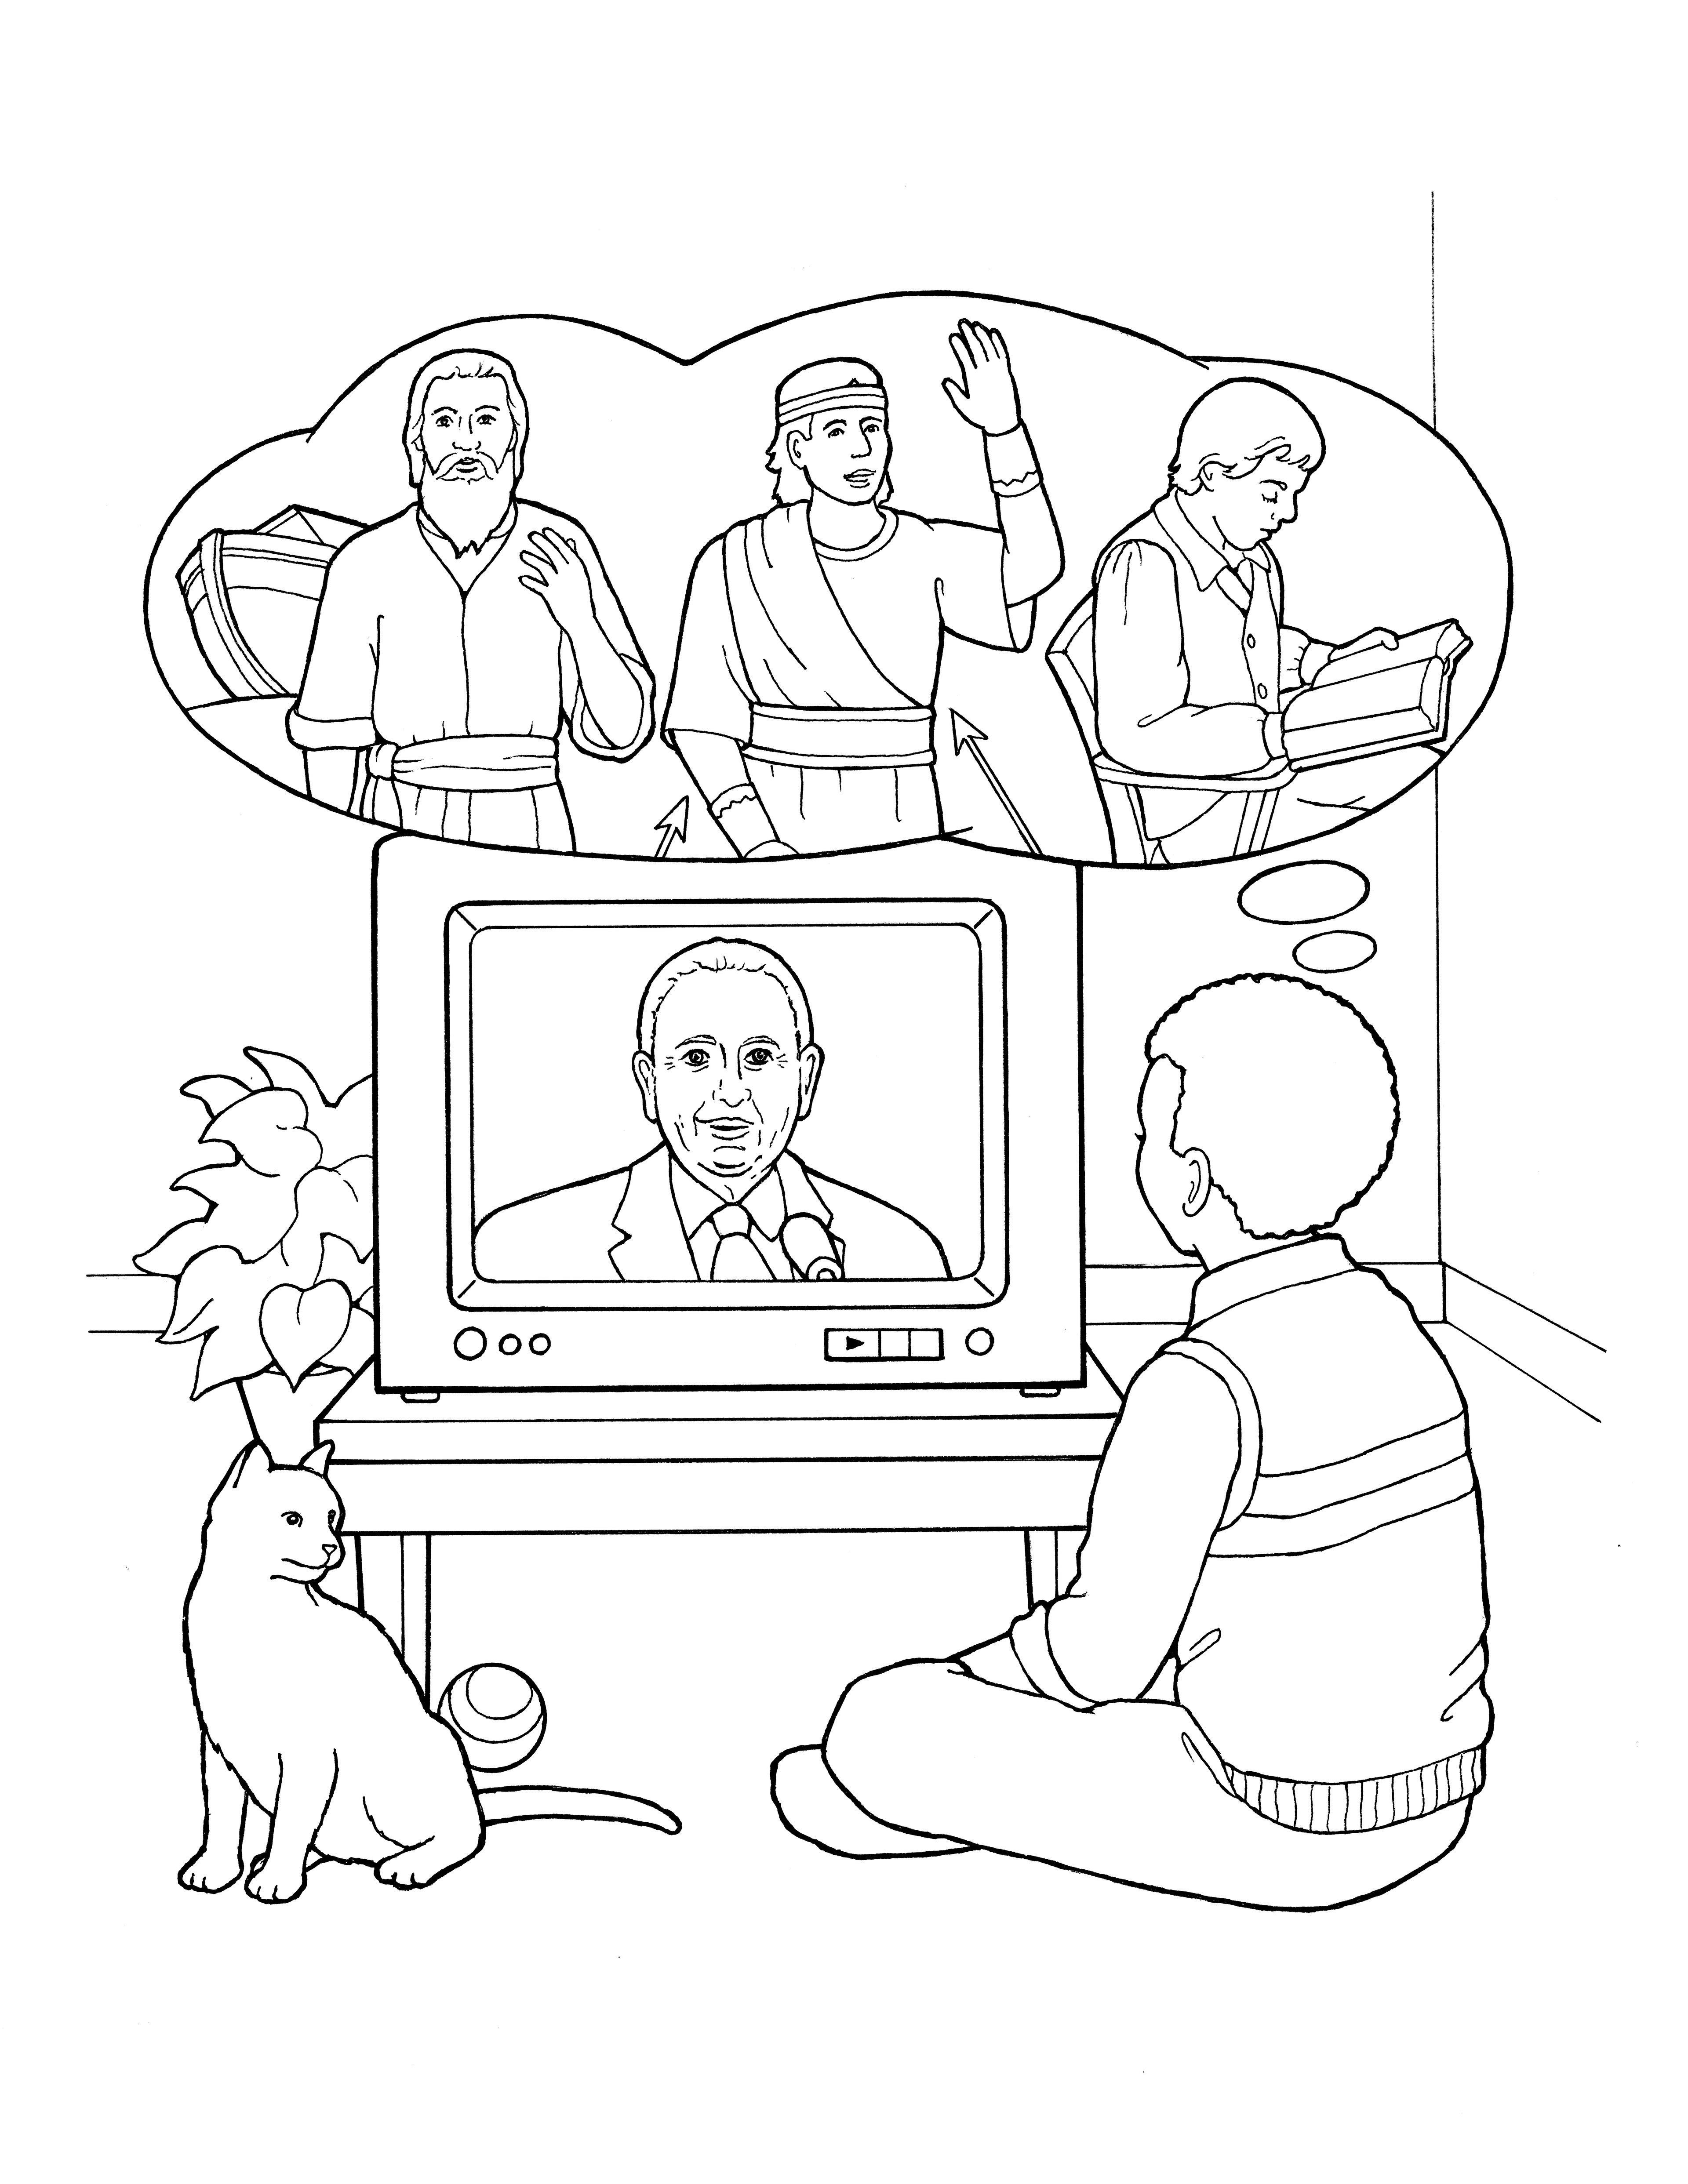 An illustration of children watching Thomas S. Monson speak during general conference.